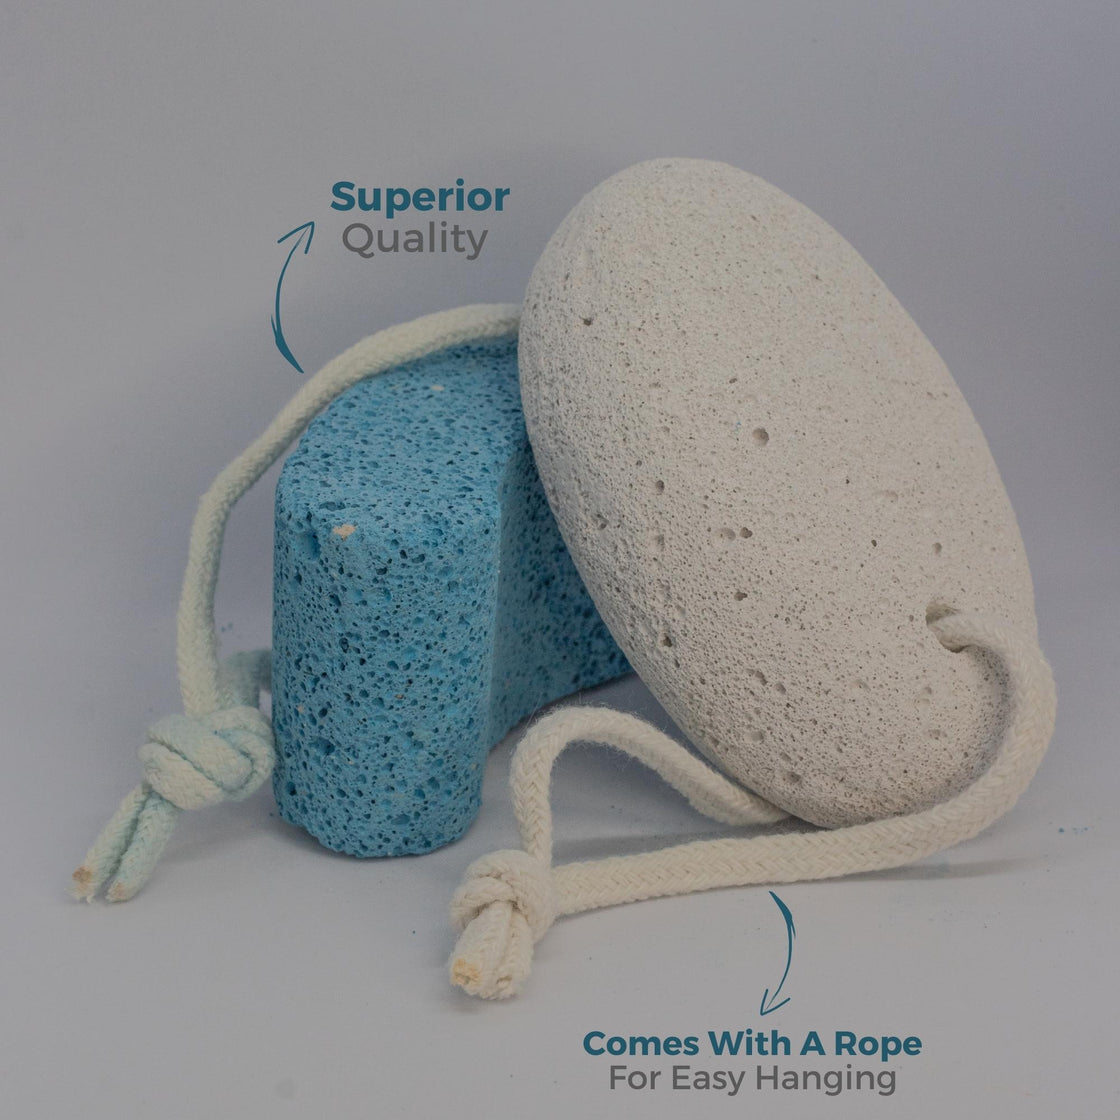 Allure Pumice Stone Pack of 2 (BPS-02B+03)